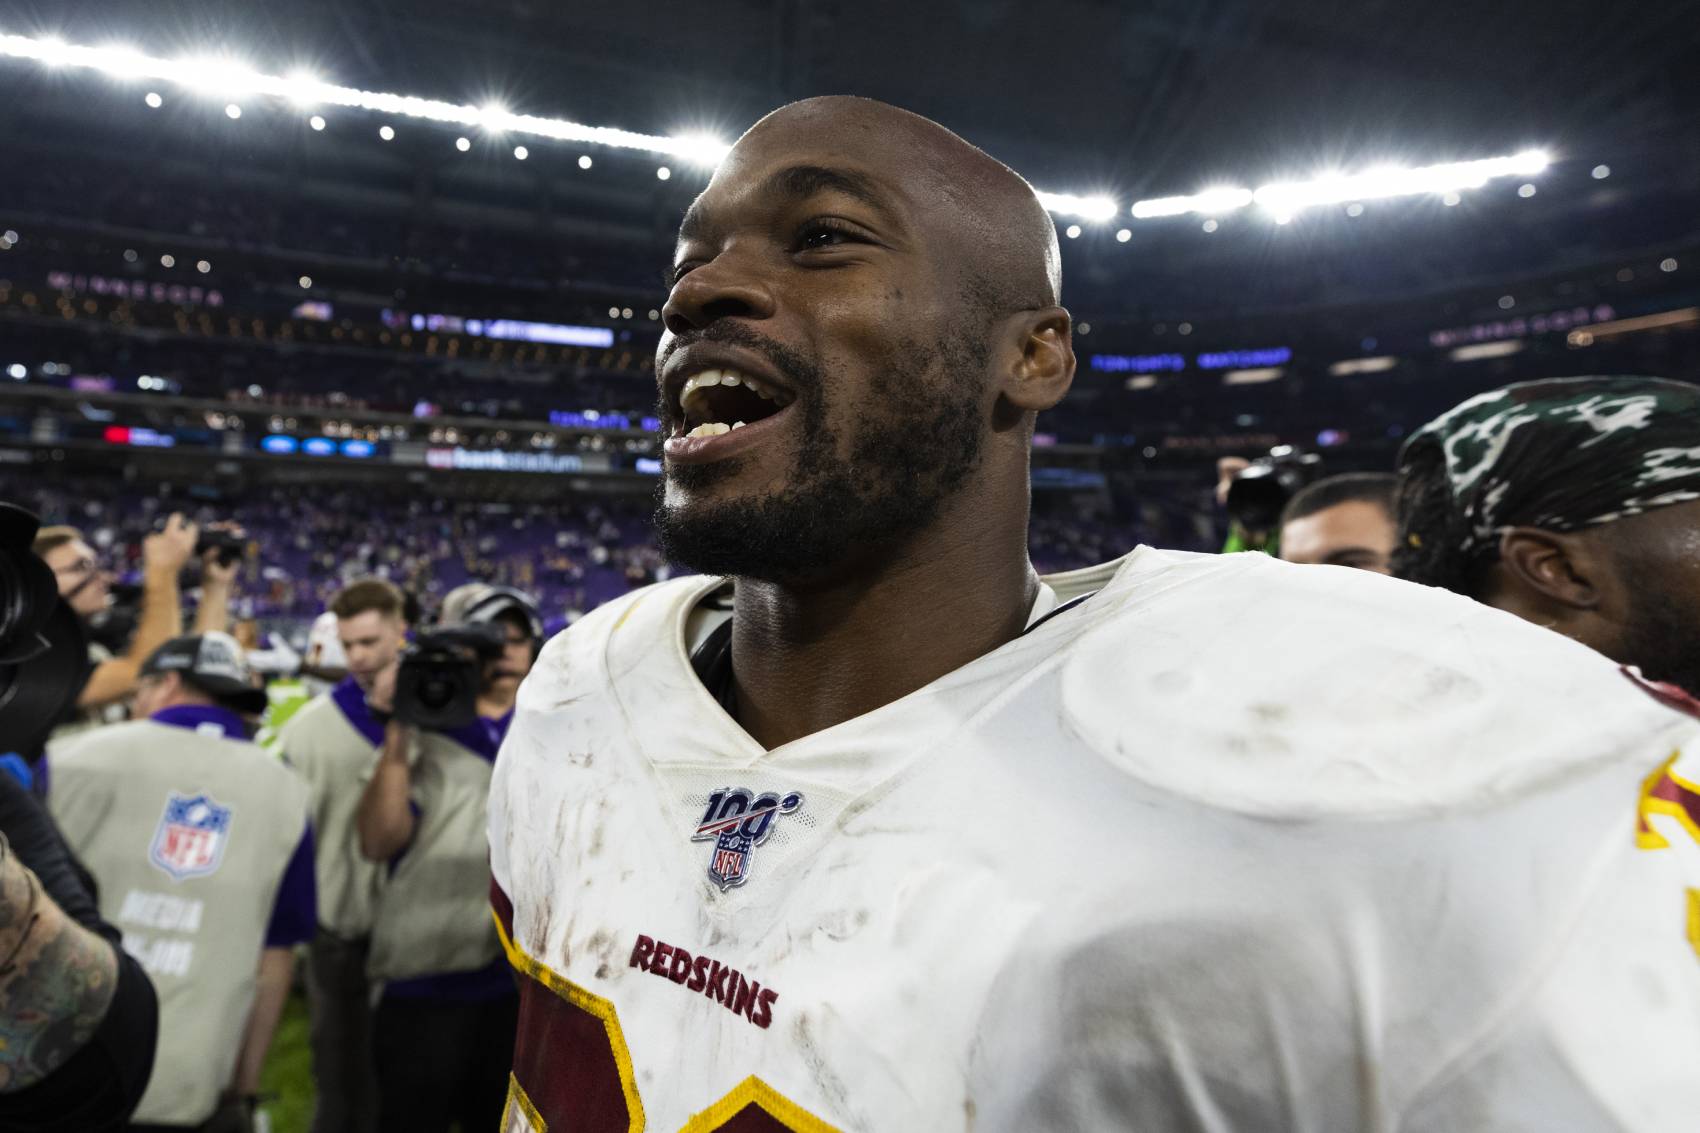 Washington Redskins running back Adrian Peterson hates the NFL's payment culture.